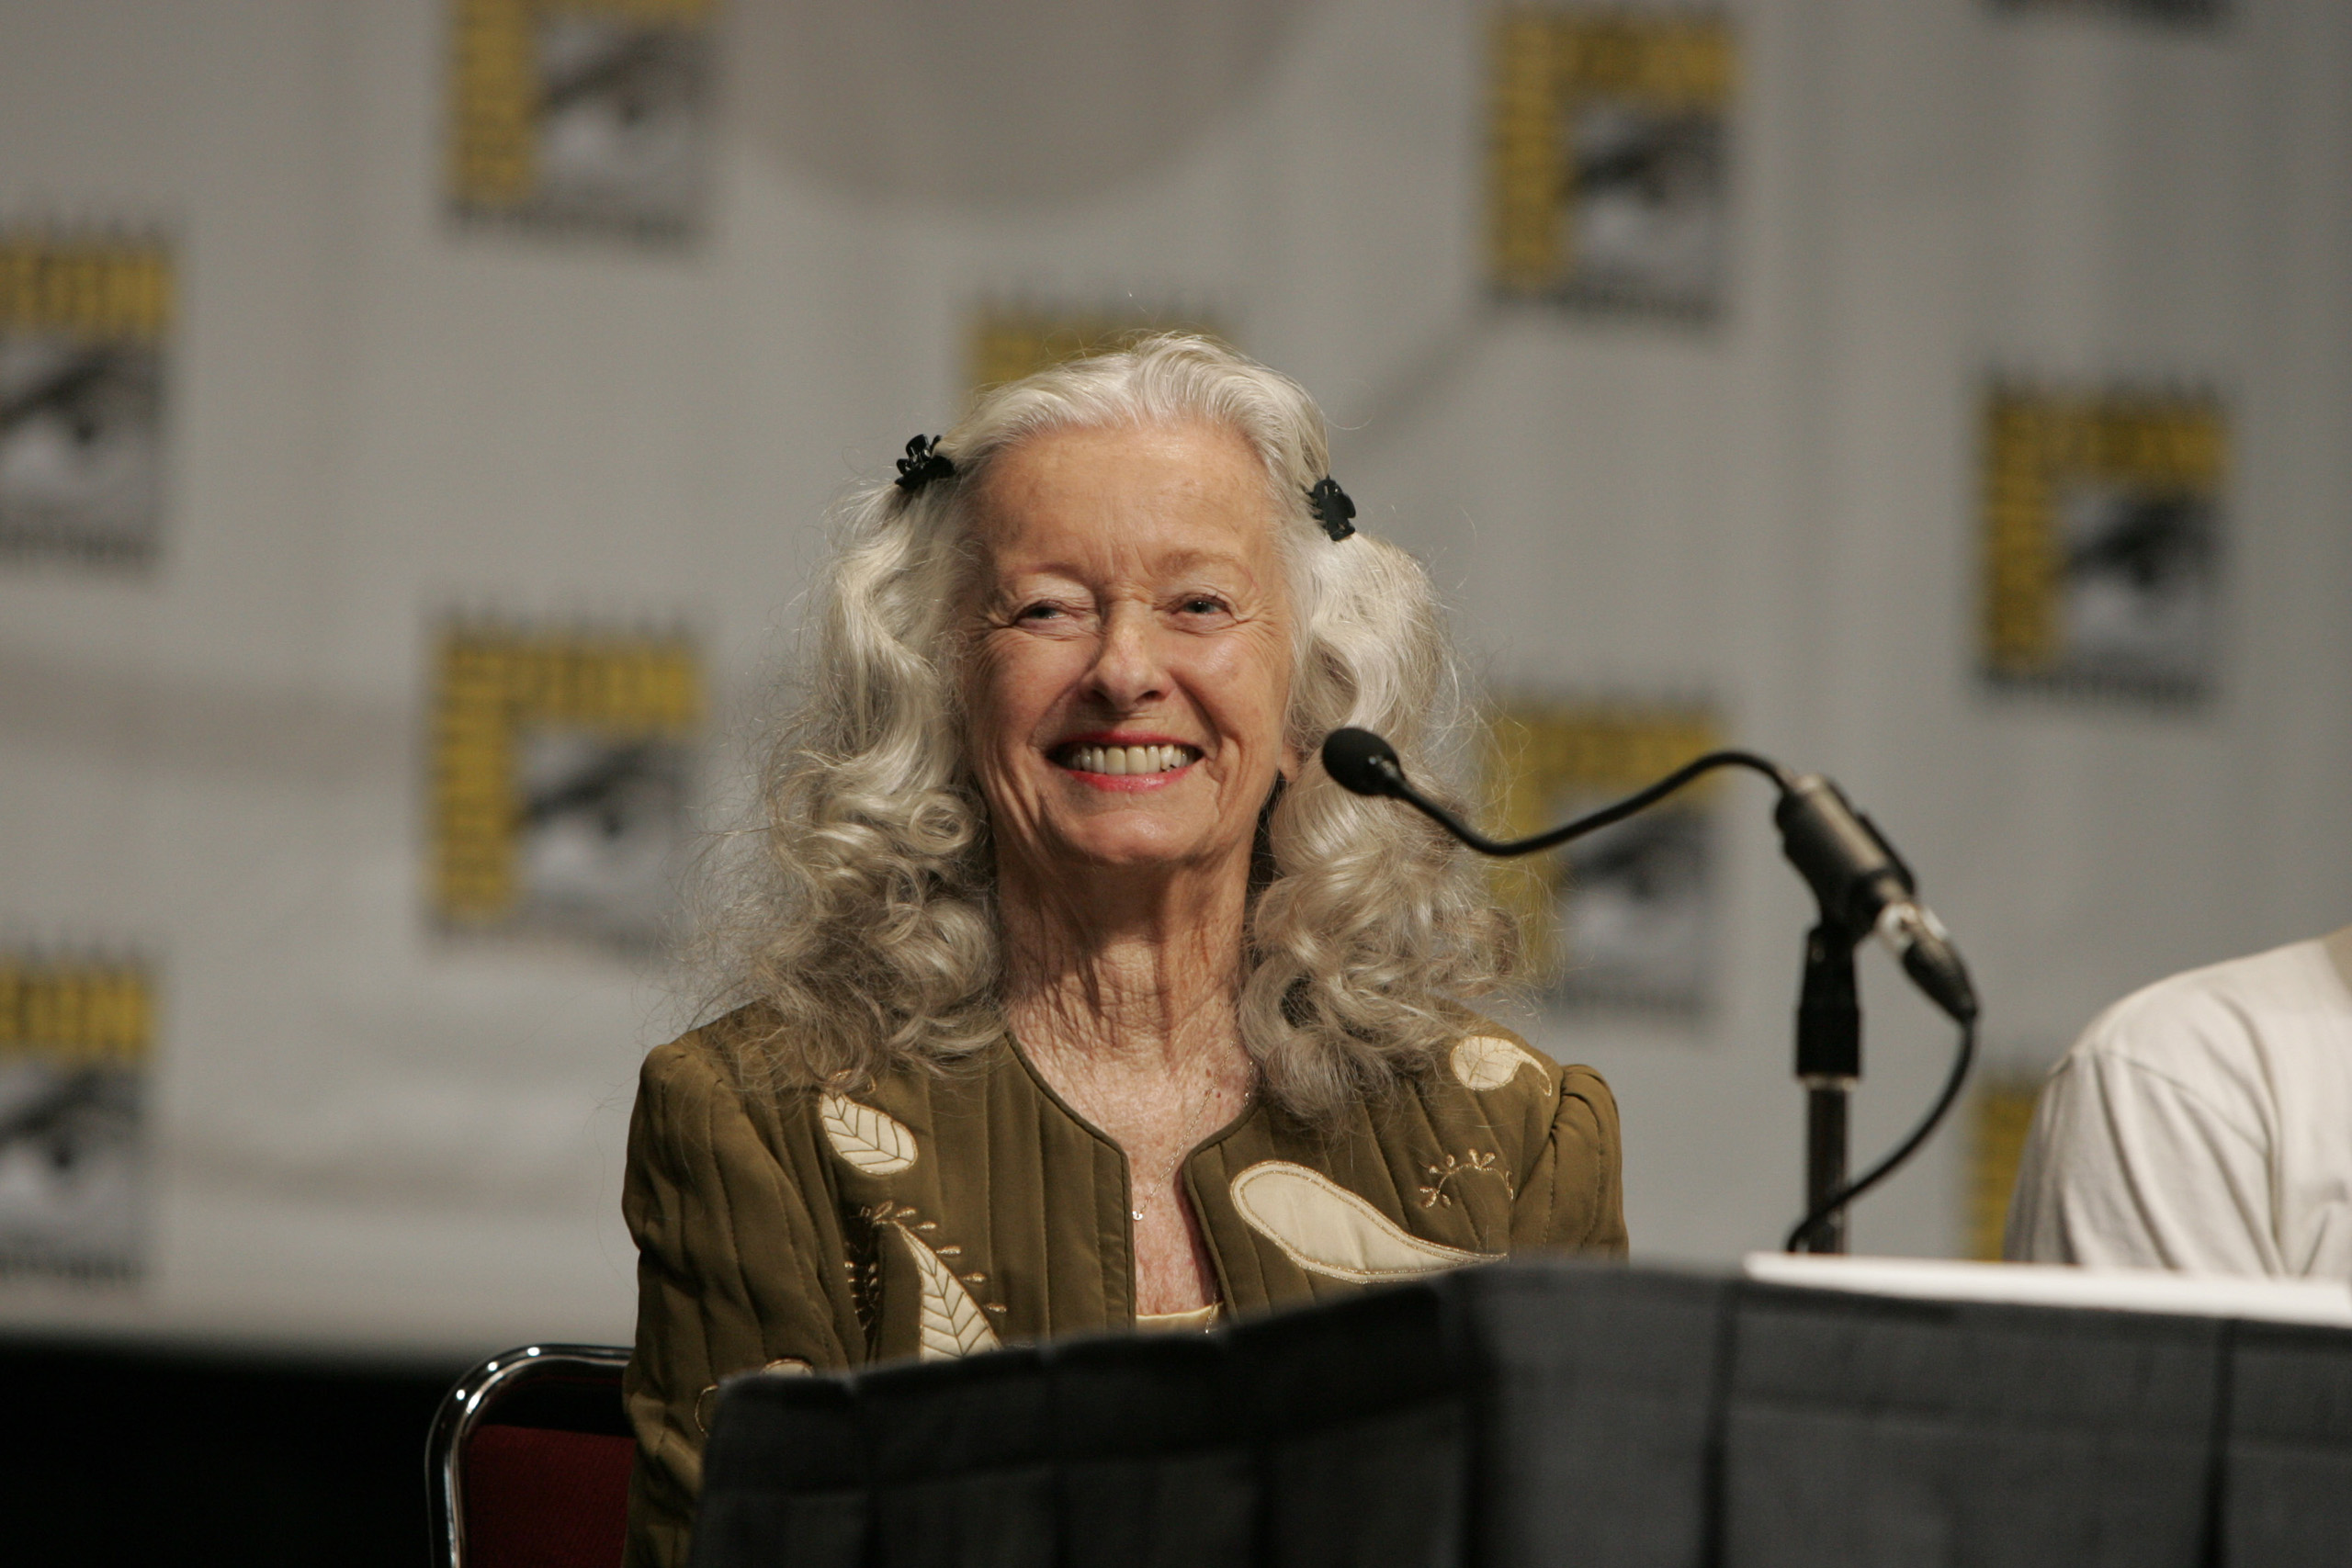 Noel Neill during Warner Home Video introduces 'Superman II: The Richard Donner Cut' and the New 'Superman' DVD collections featuring Christopher Reeve's Man of Steel at Comic Con in San Diego, Calif. (E. Charbonneau—WireImage for Carl Samrock Publi)